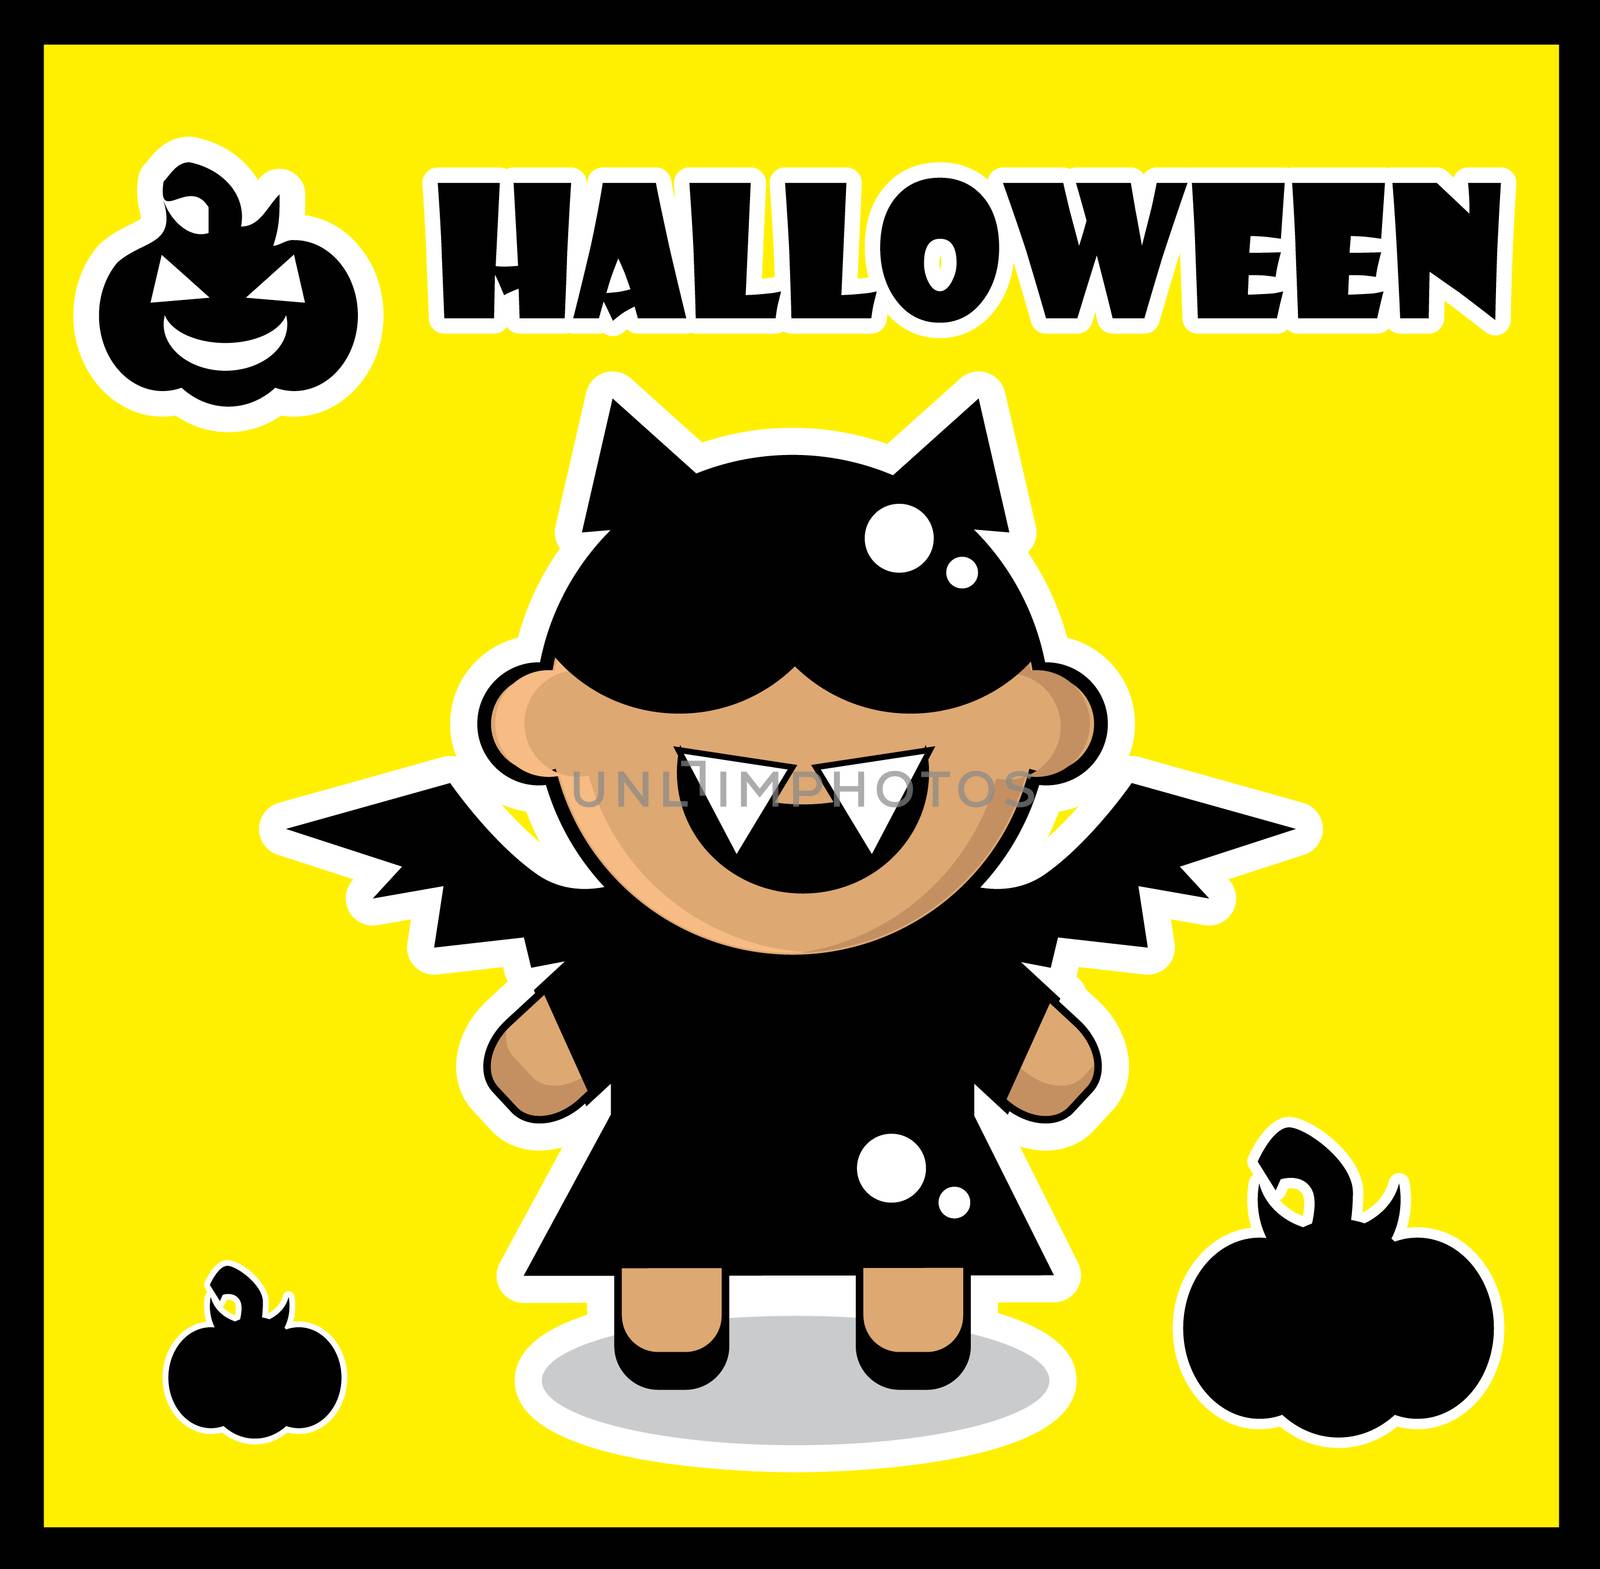 Halloween icon Bat card poster background silhouette of bat girl and pumpkin